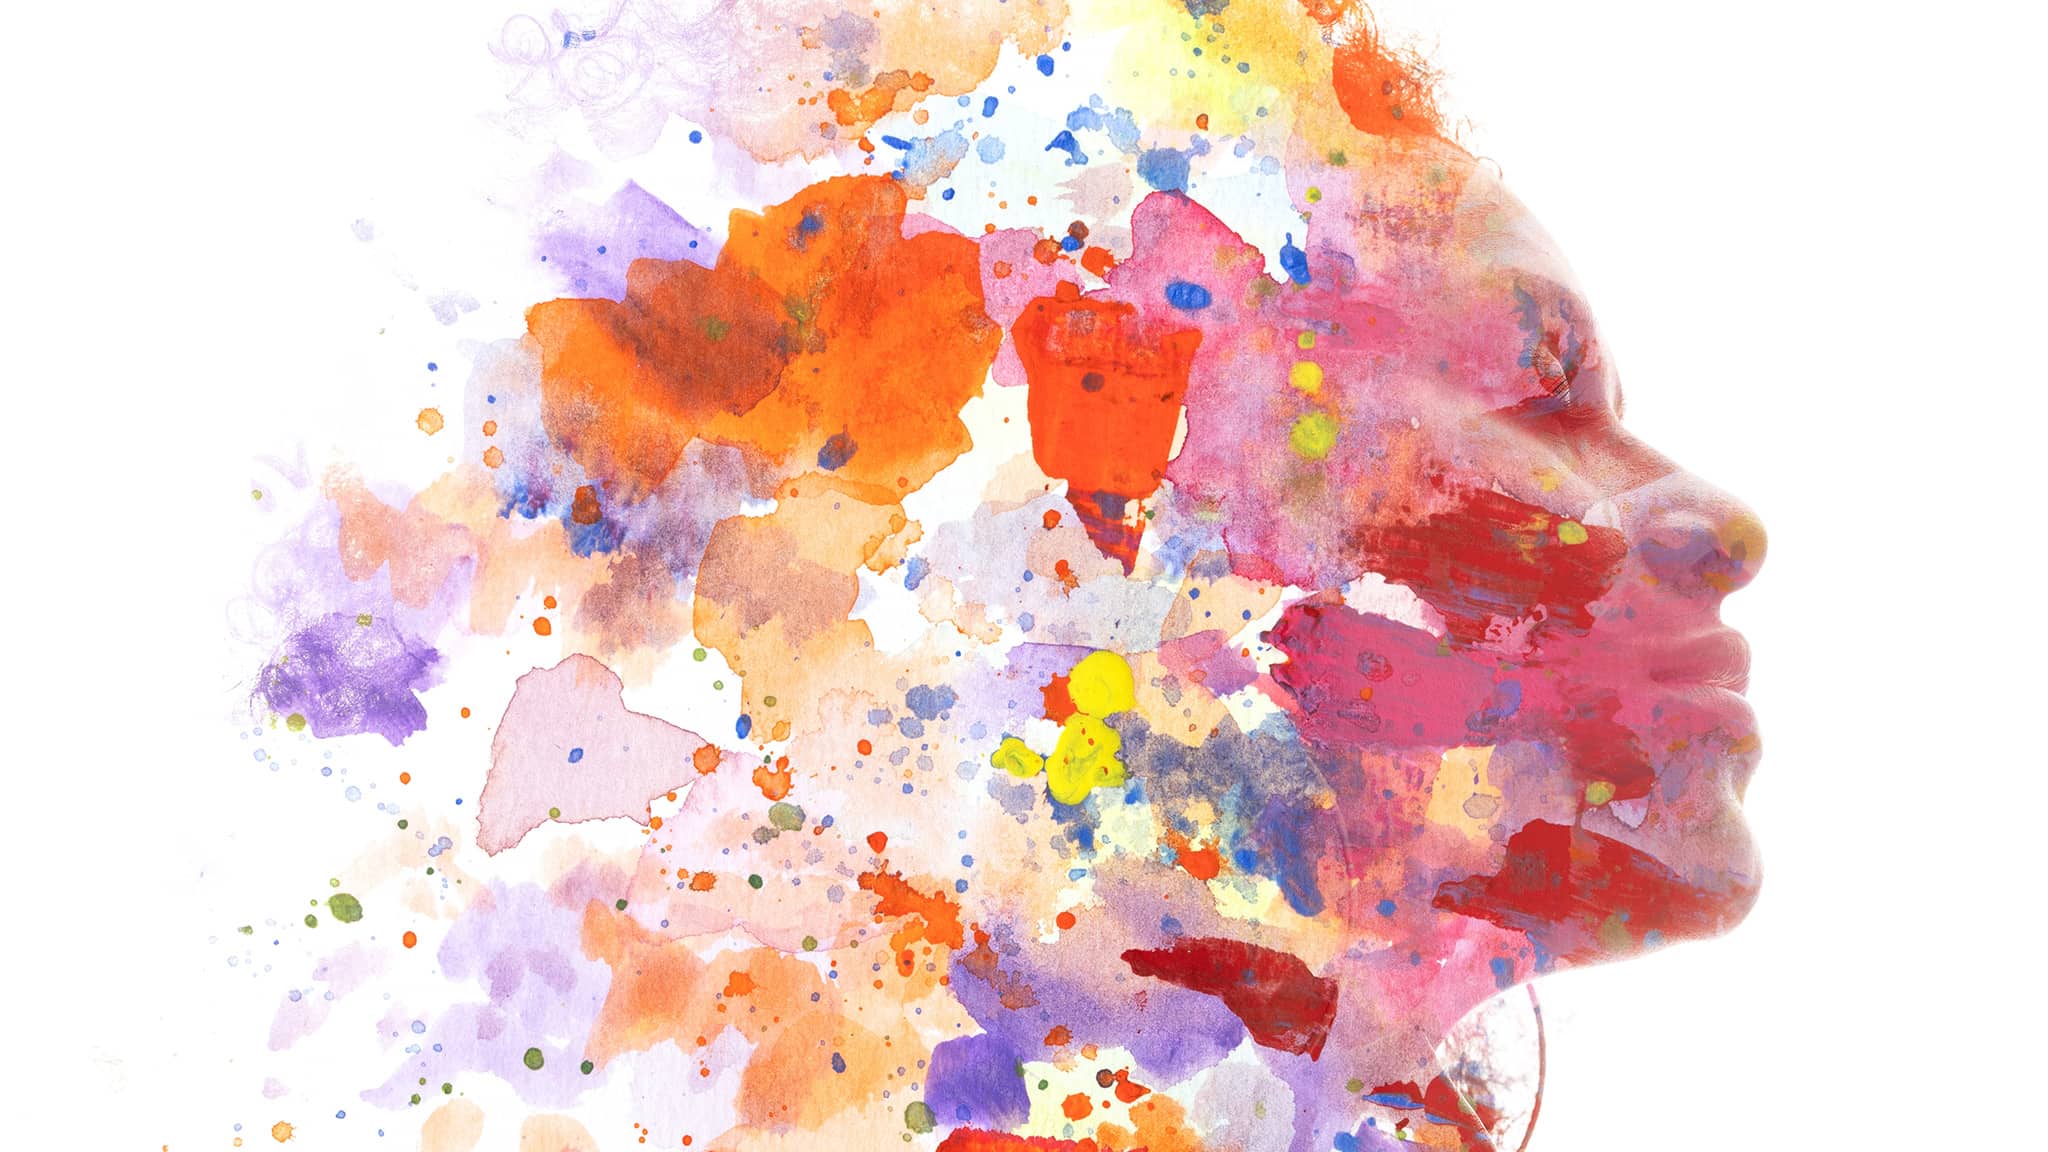 Watercolor Silhouette Of Woman's Face Looking To The Right, The Back Of Her Head Fading Into A Cacophony Of Paint Splashes, Mental Health Concept